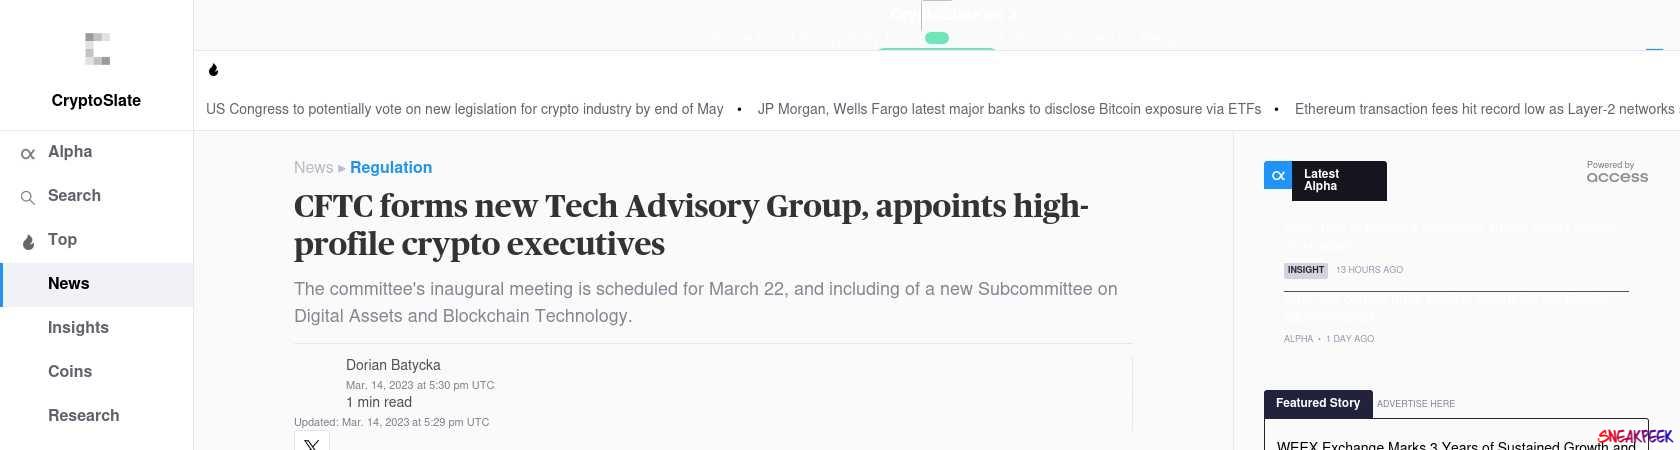 Read the full Article:  ⭲ CFTC forms new Tech Advisory Group, appoints high-profile crypto executives